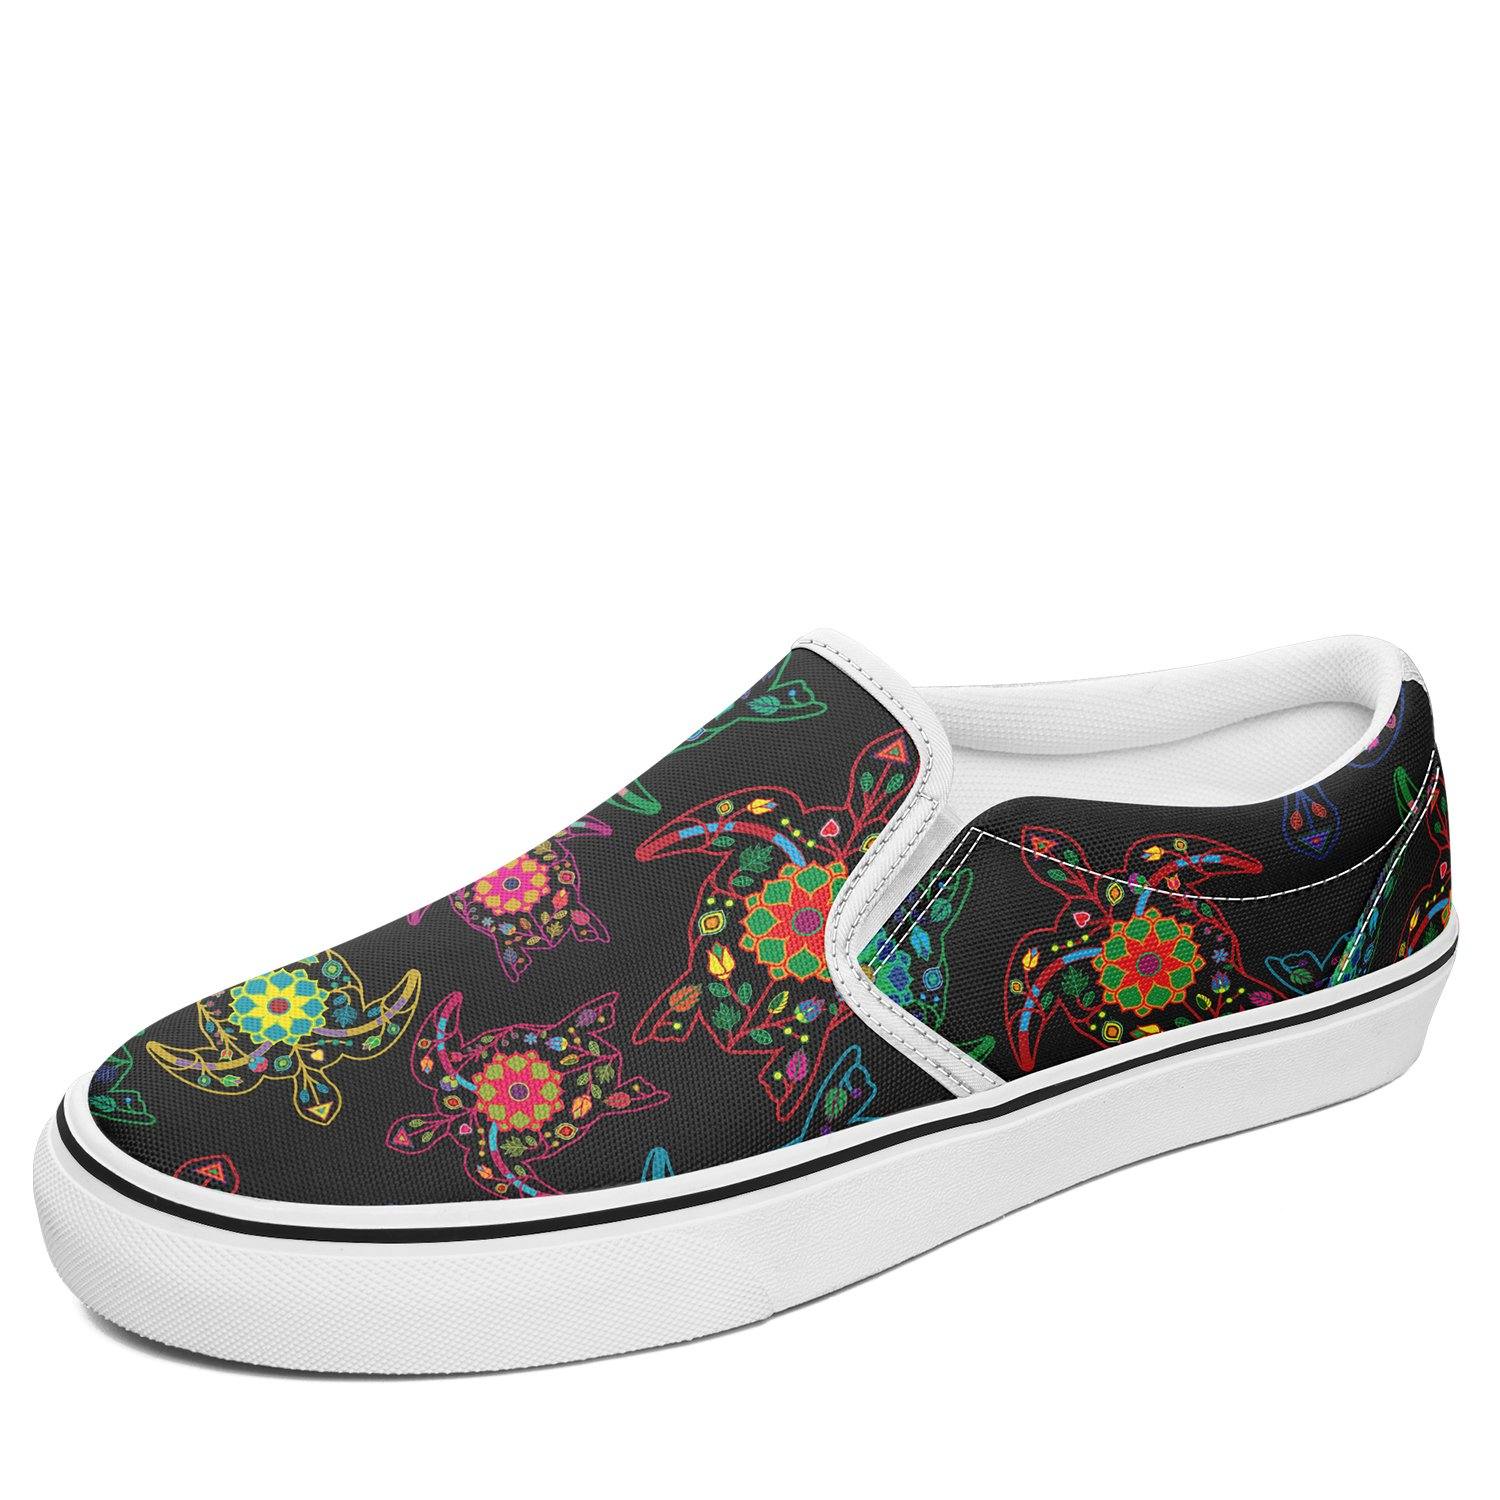 Floral Turtle Otoyimm Canvas Slip On Shoes otoyimm Herman US Youth 1 / EUR 32 White Sole 